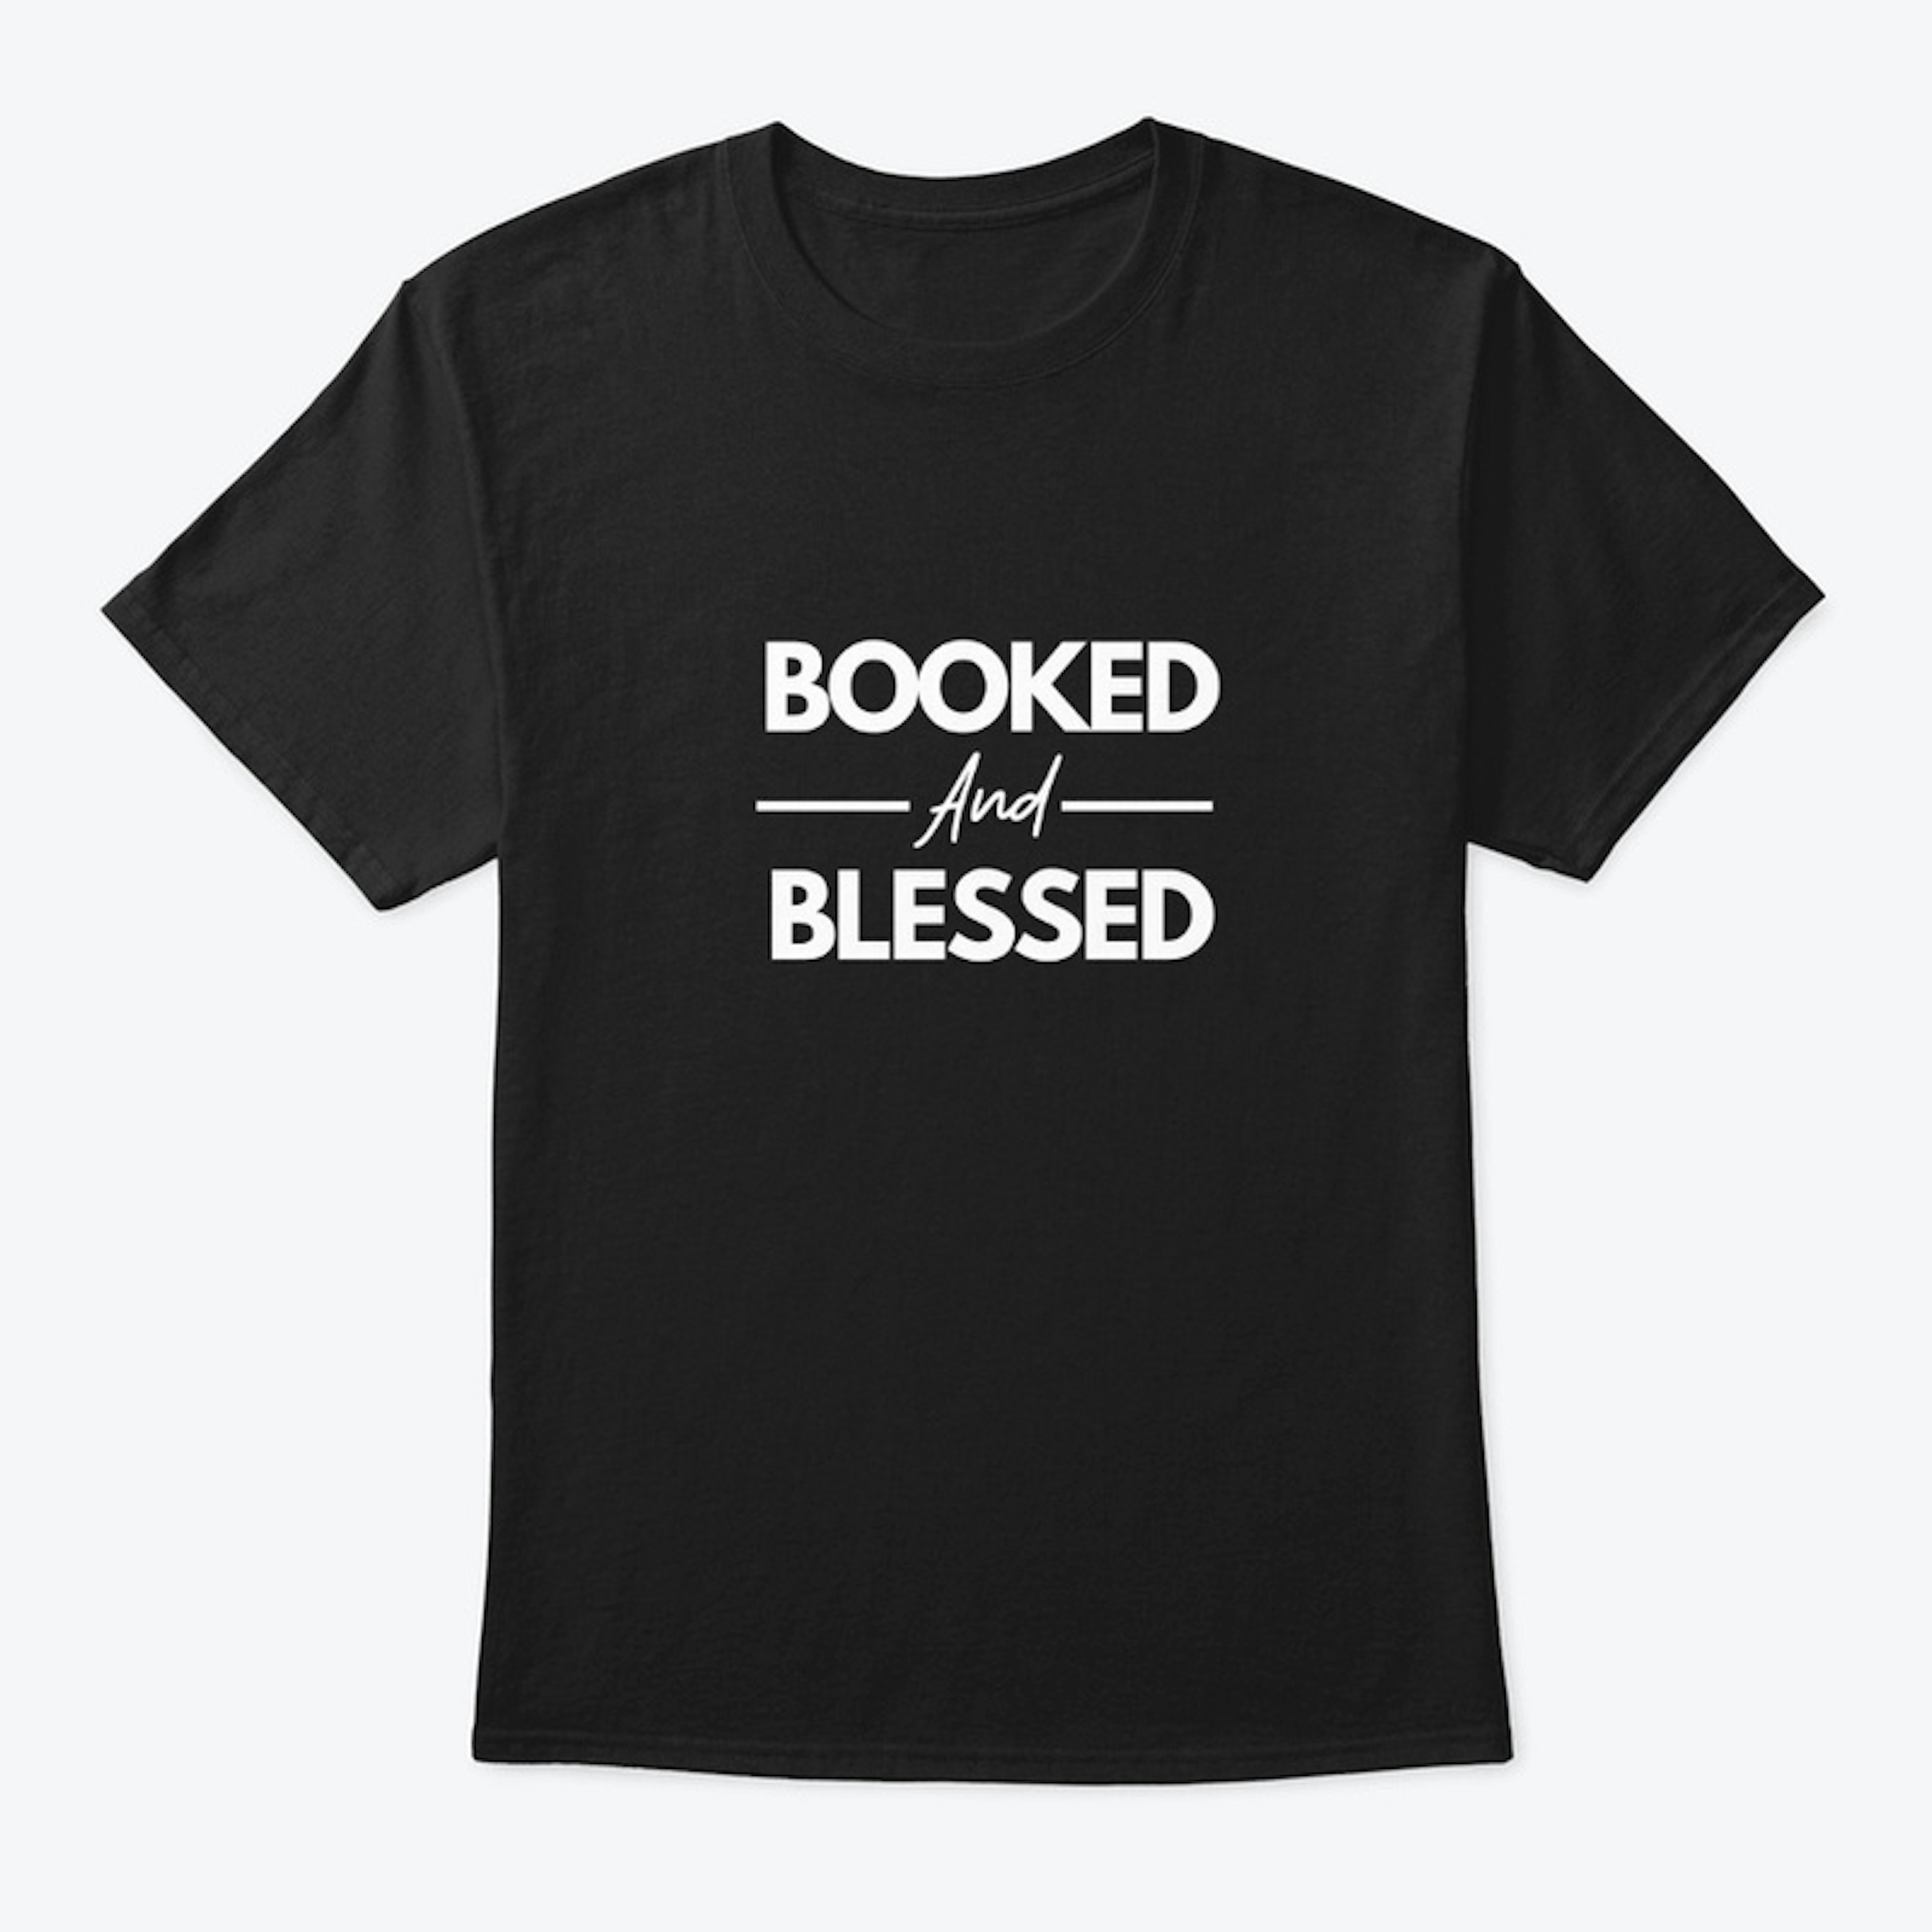 Booked & Blessed Tee